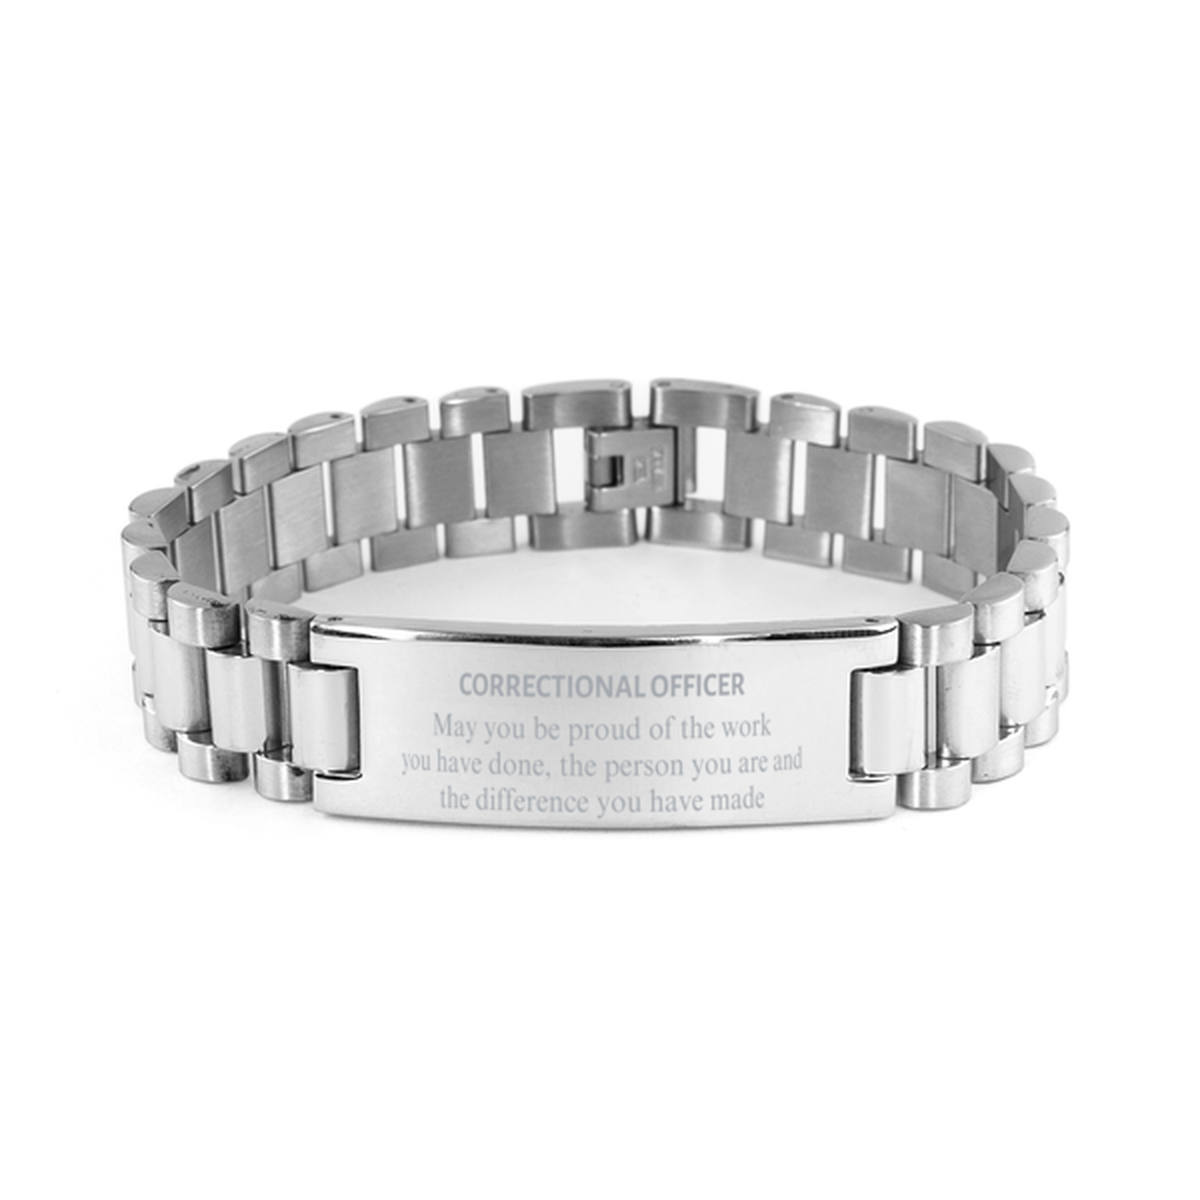 Correctional Officer May you be proud of the work you have done, Retirement Correctional Officer Ladder Stainless Steel Bracelet for Colleague Appreciation Gifts Amazing for Correctional Officer